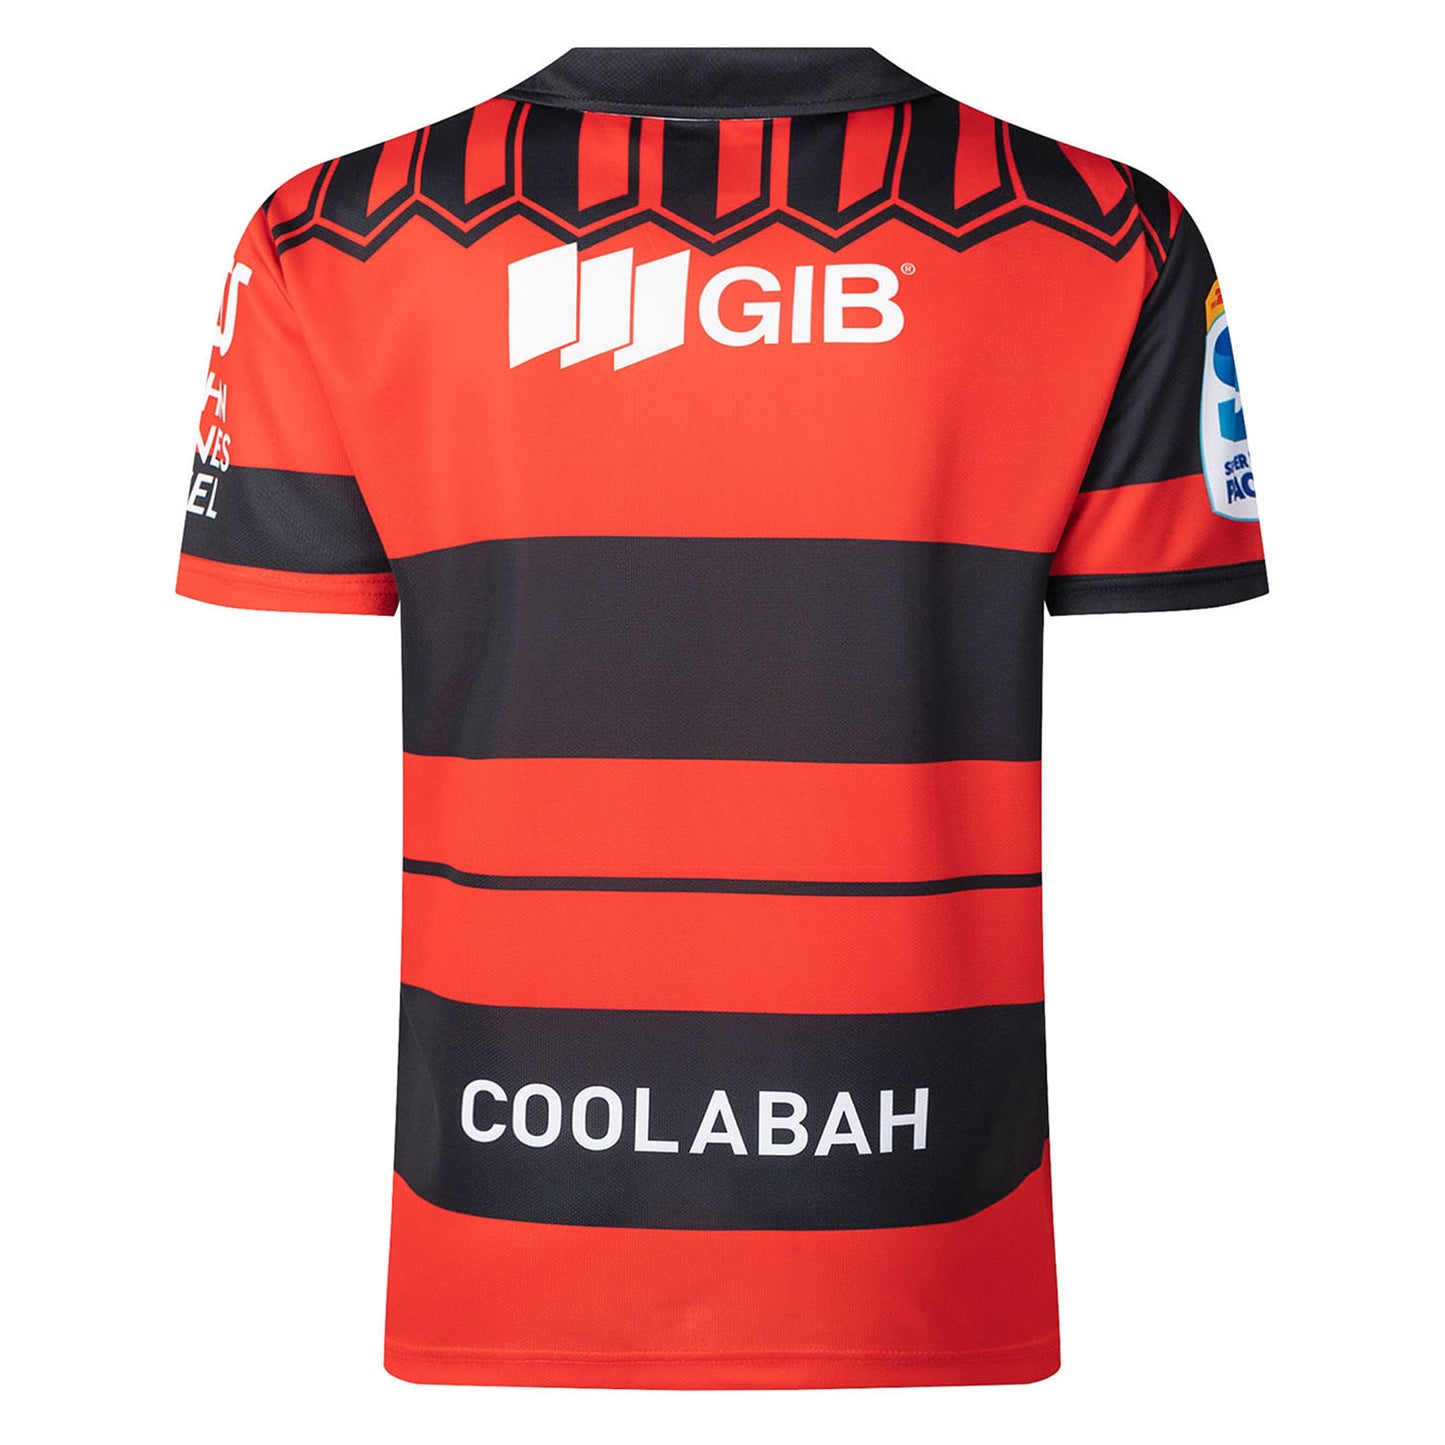 Crusaders Youth Replica Jersey Heritage